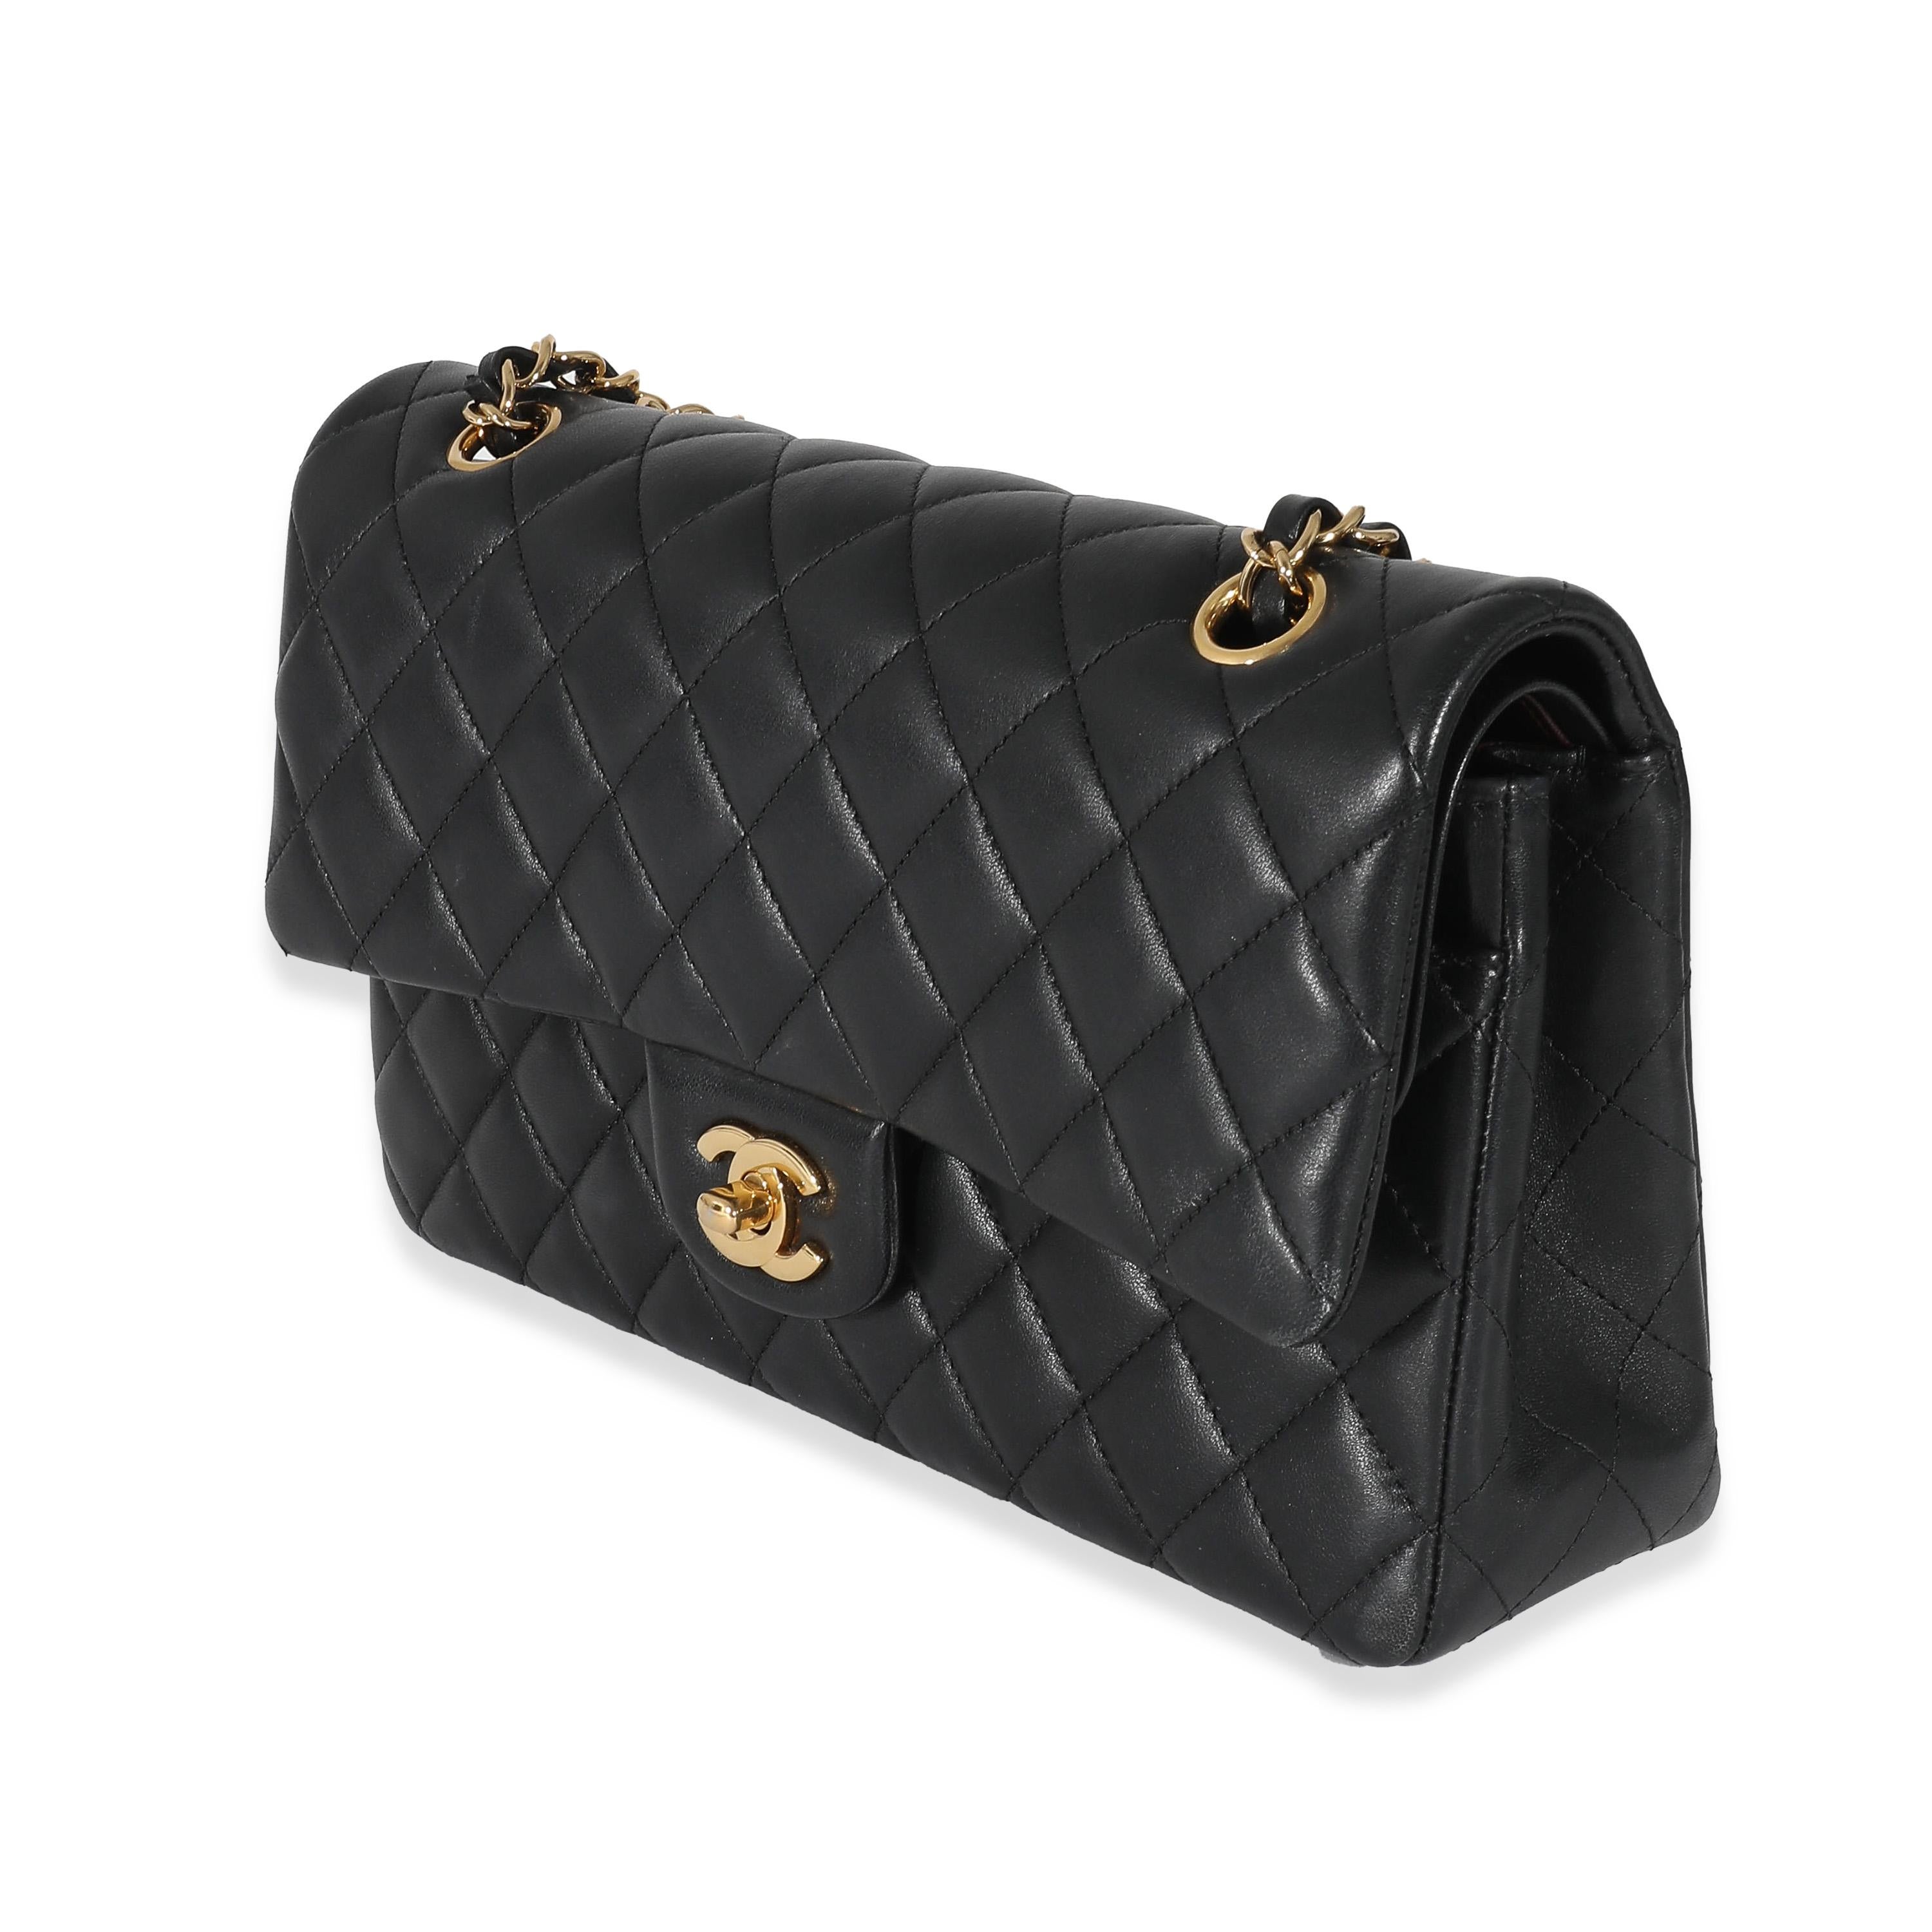 Chanel Black Lambskin Medium Classic Double Flap Bag In Excellent Condition For Sale In New York, NY